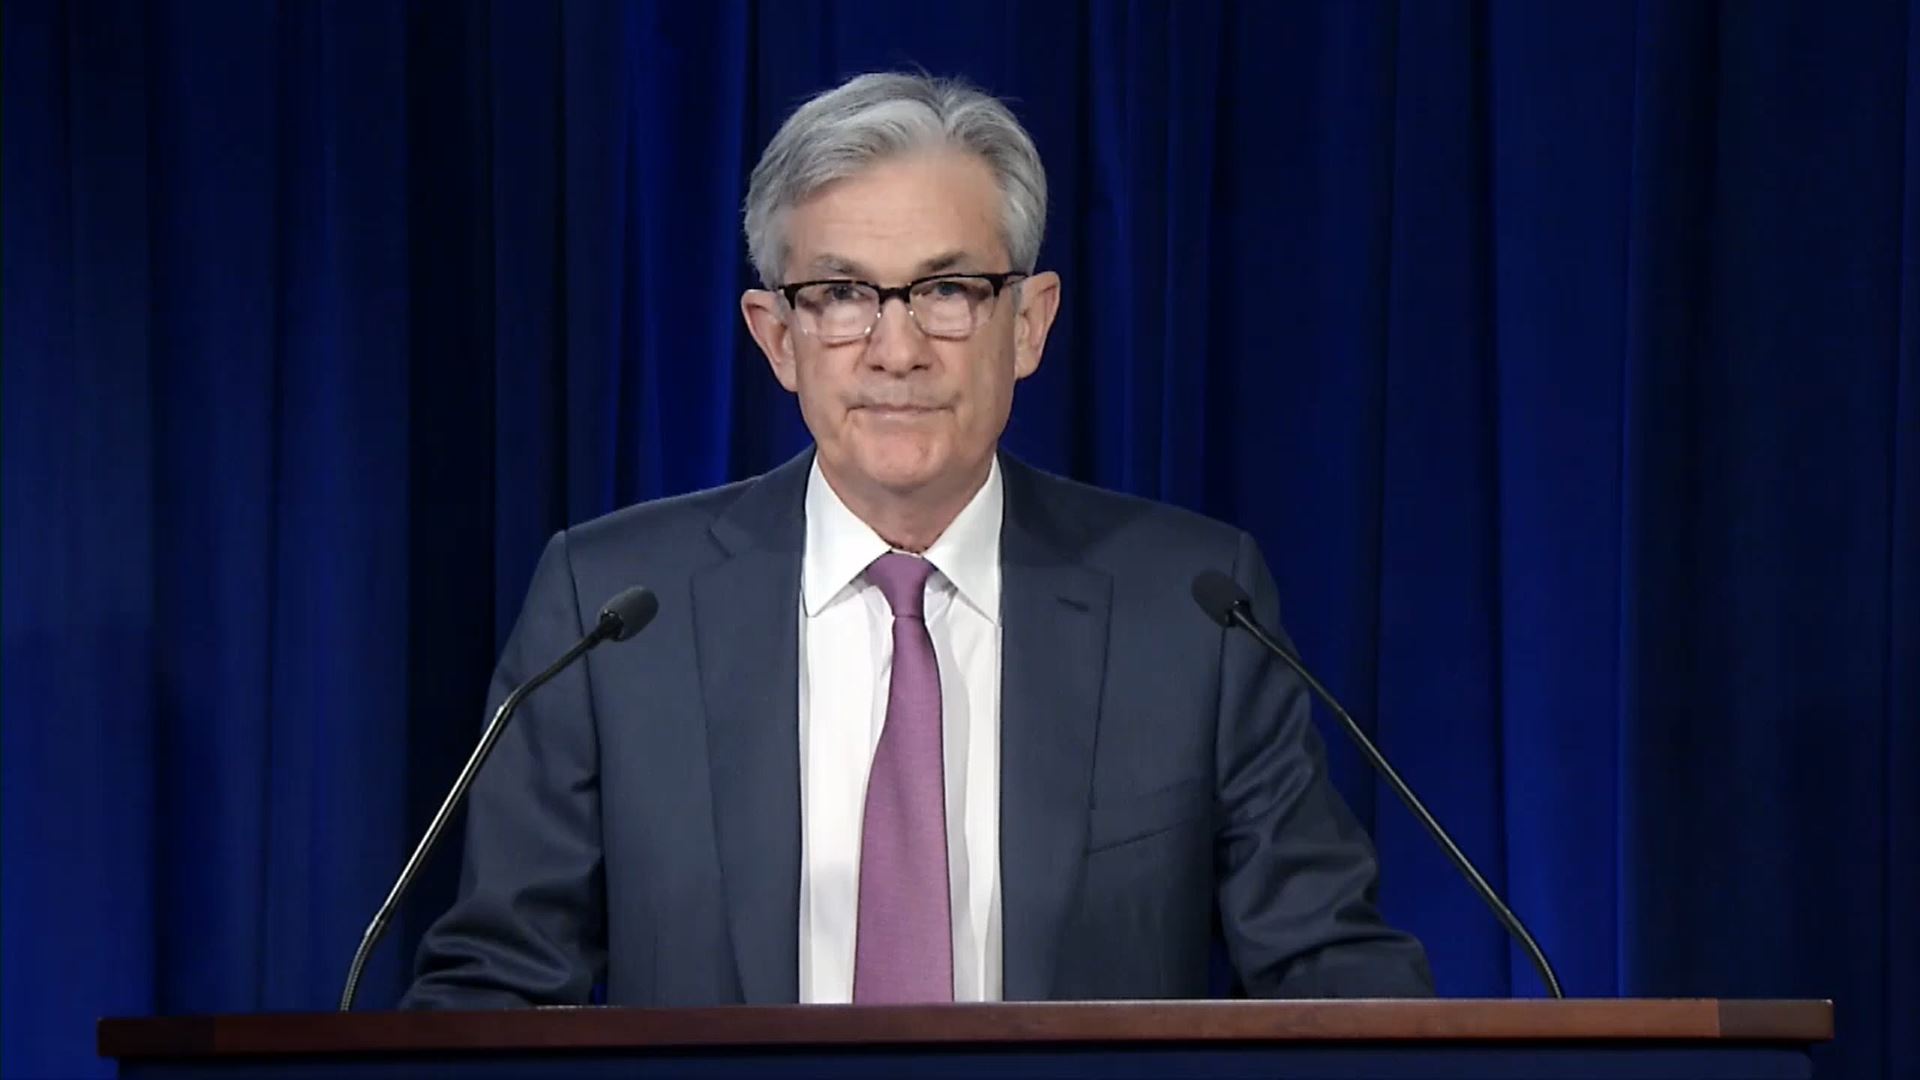 In this screengrab taken from the Federal Reserve website, Federal Reserve Chairman Jerome Powell issues the Federal Open Market Committee statement on Wednesday, April 29, in Washington, DC.